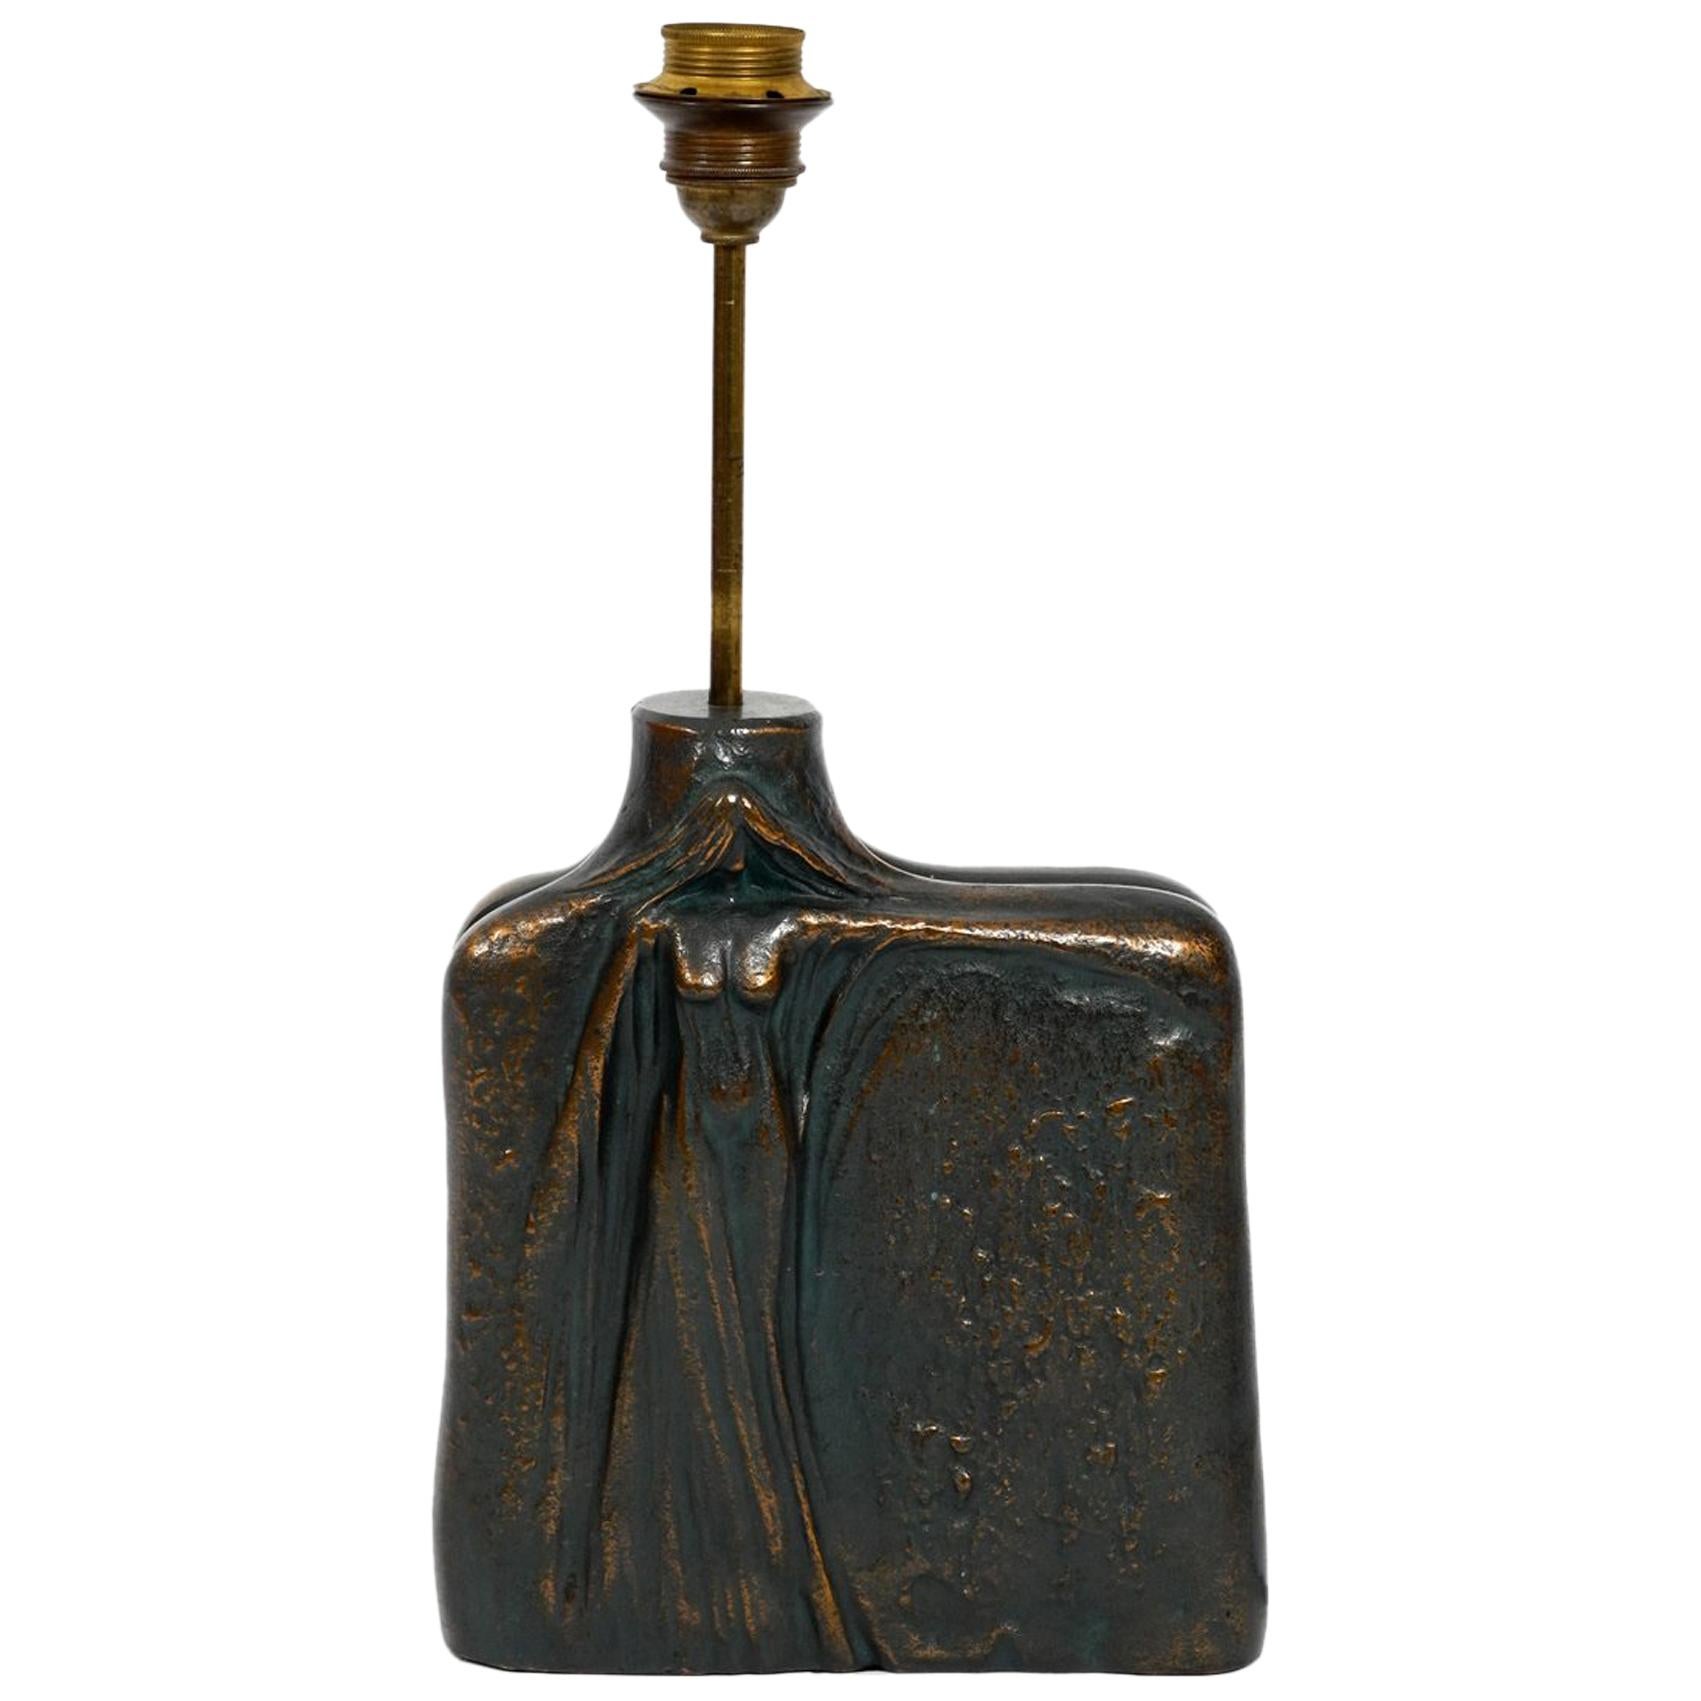 Very elegant table lamp from the 1960s made of heavy bronze with a female figure For Sale